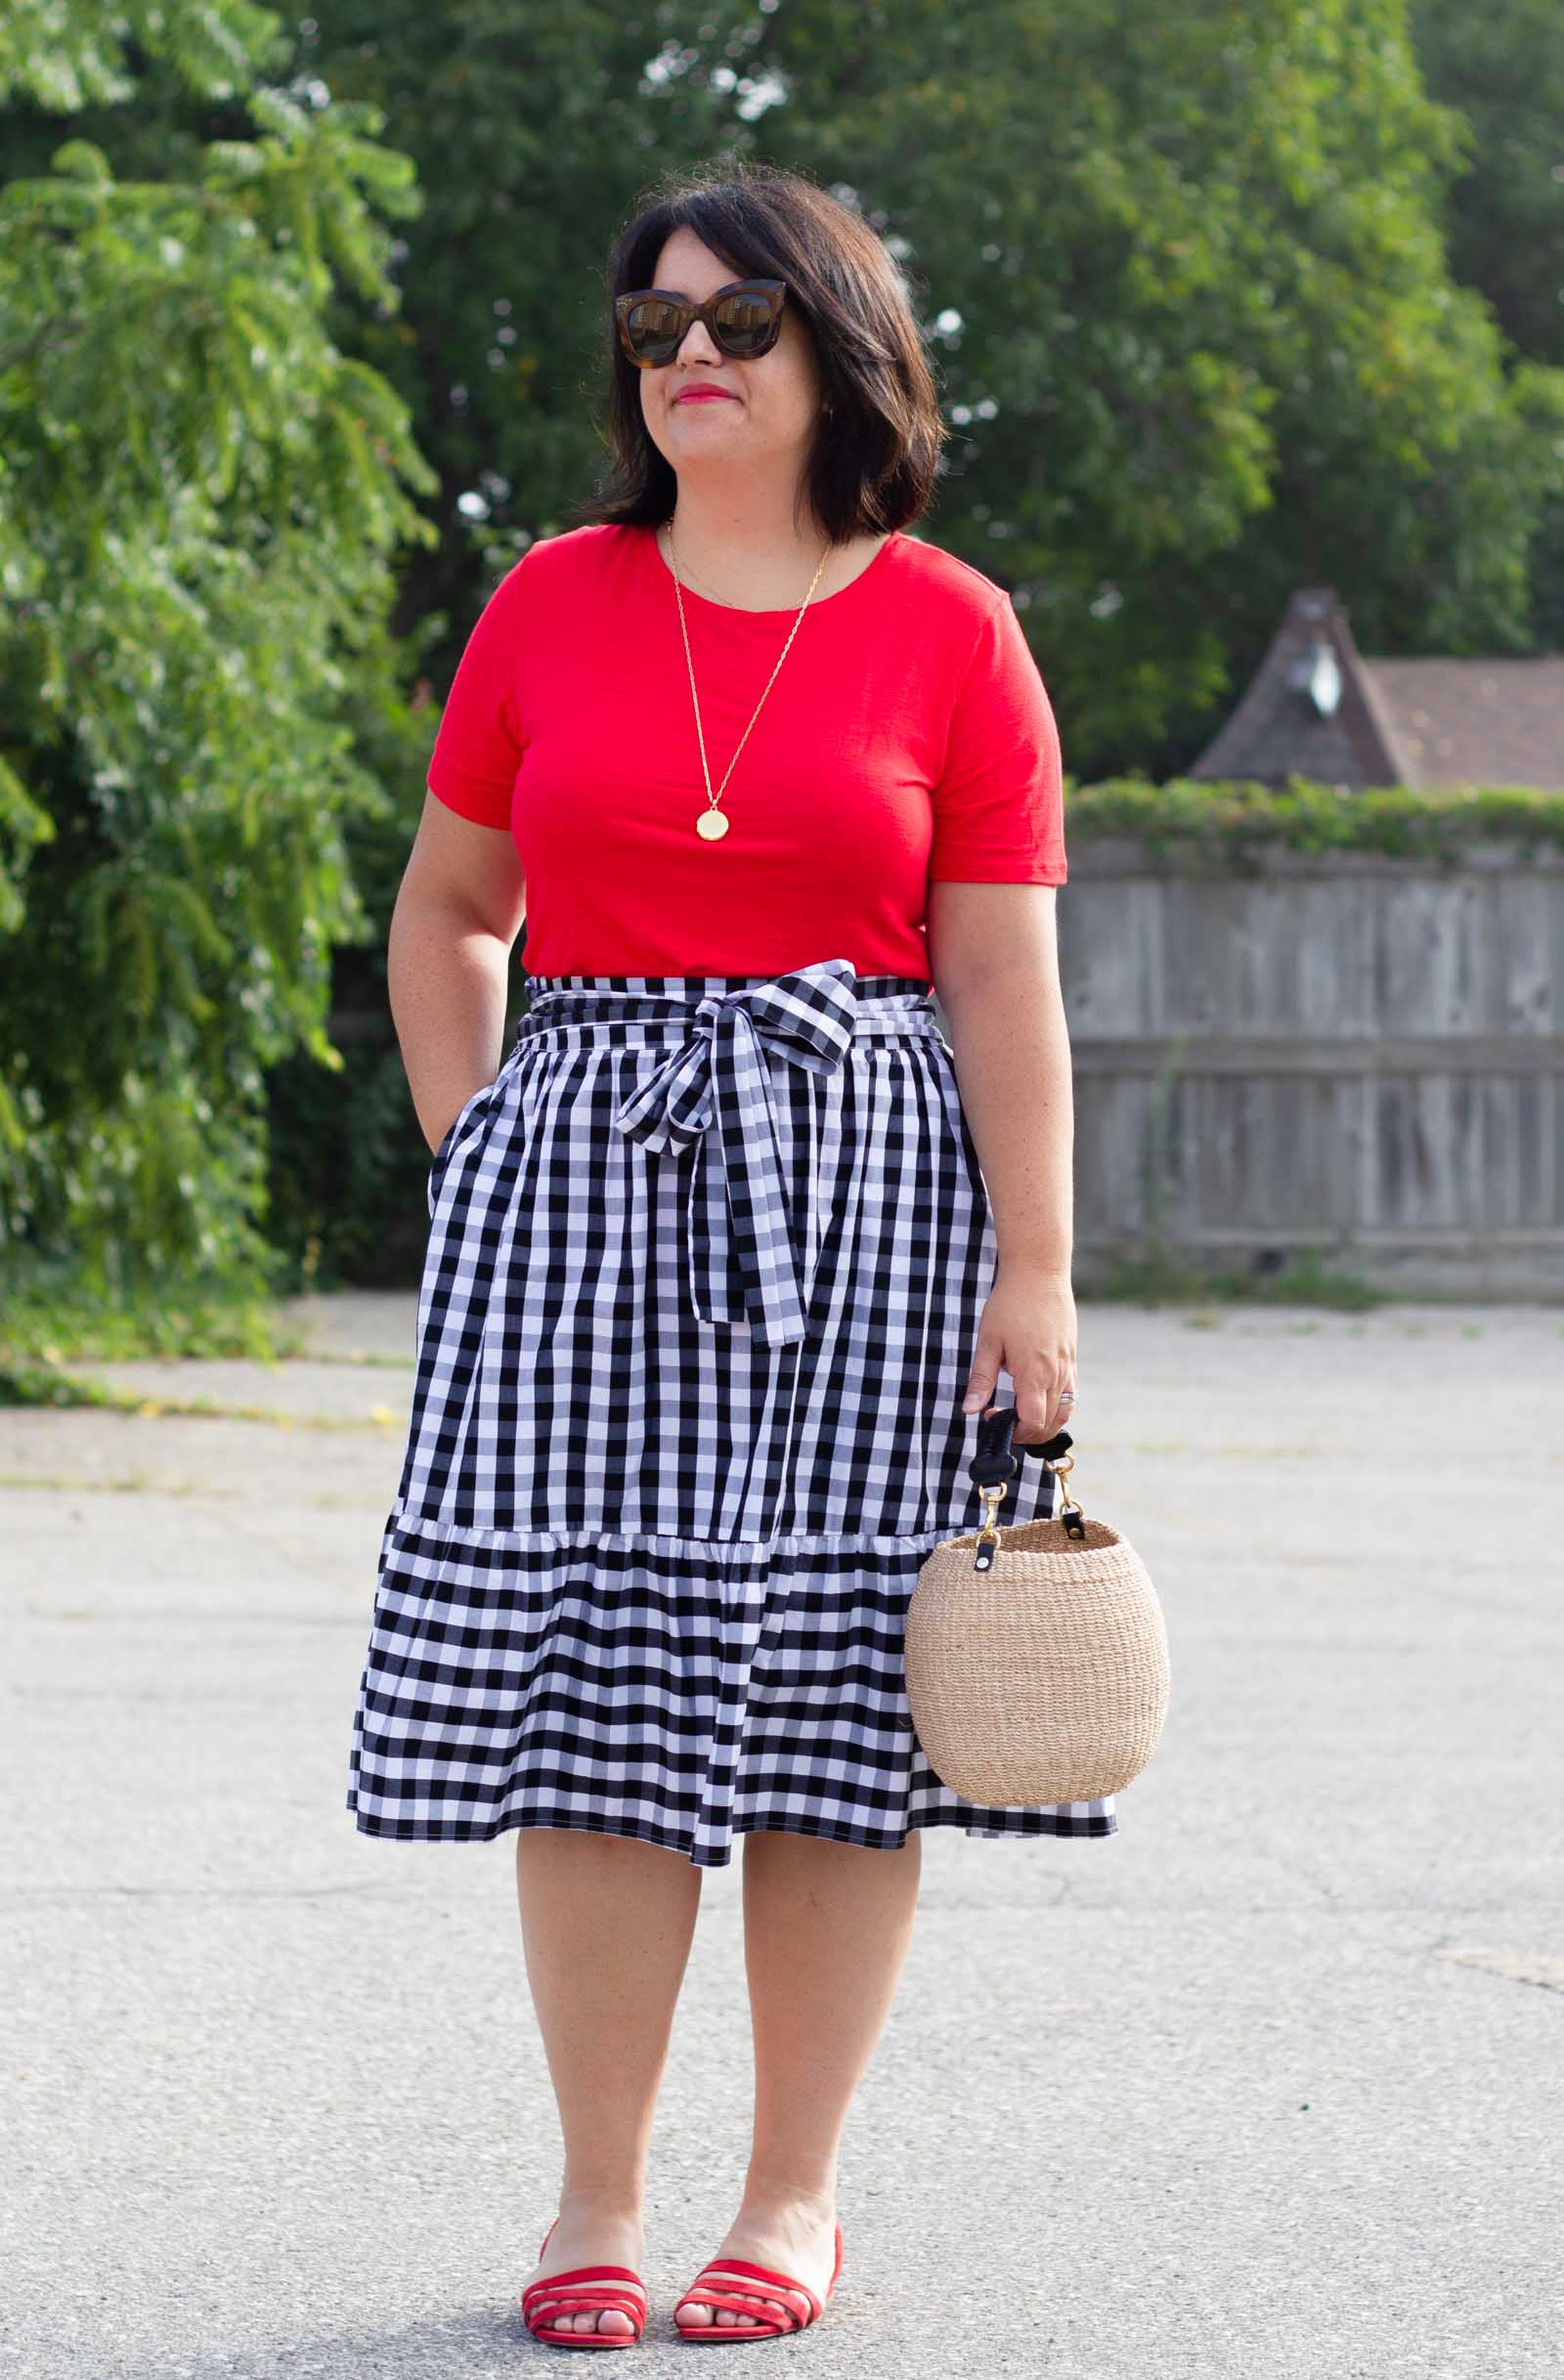 red and gingham outfit by chic everywhere